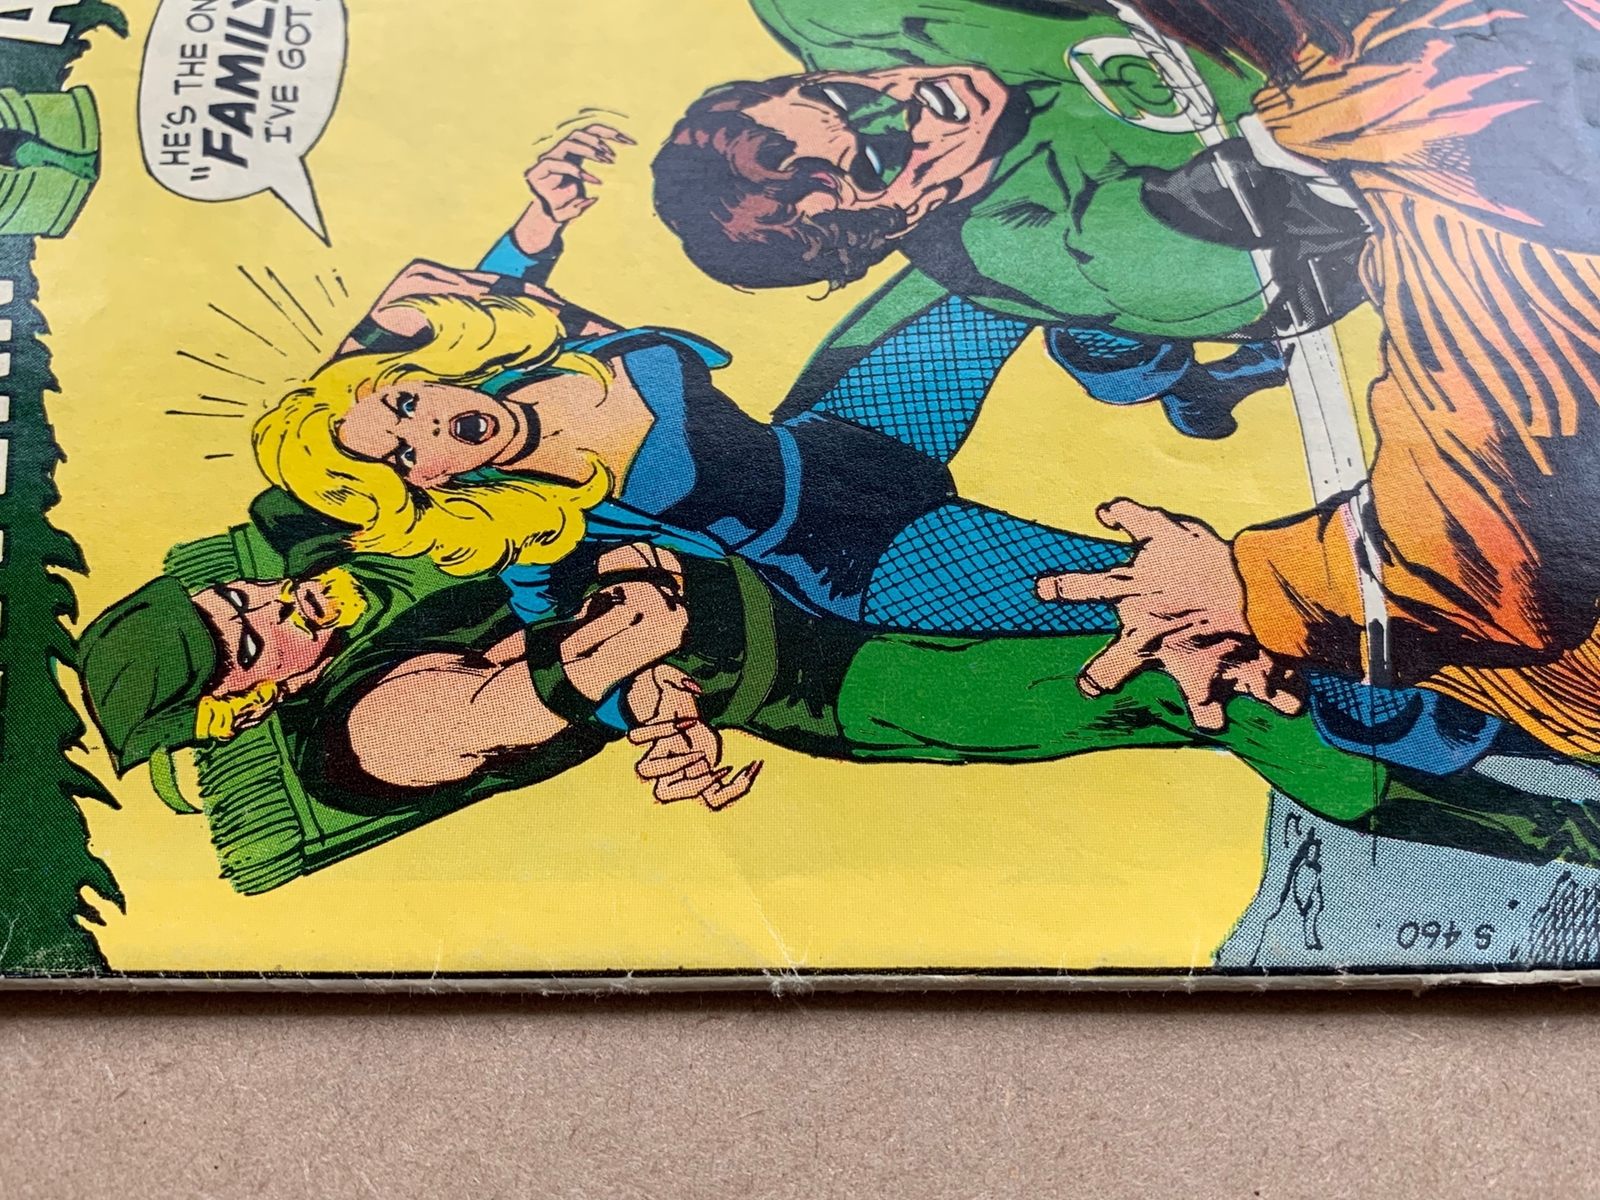 GREEN LANTERN #78 (1970 - DC) VFN (Cents Copy/Pence Stamp) - Black Canary appearances begin. Neal - Image 5 of 11